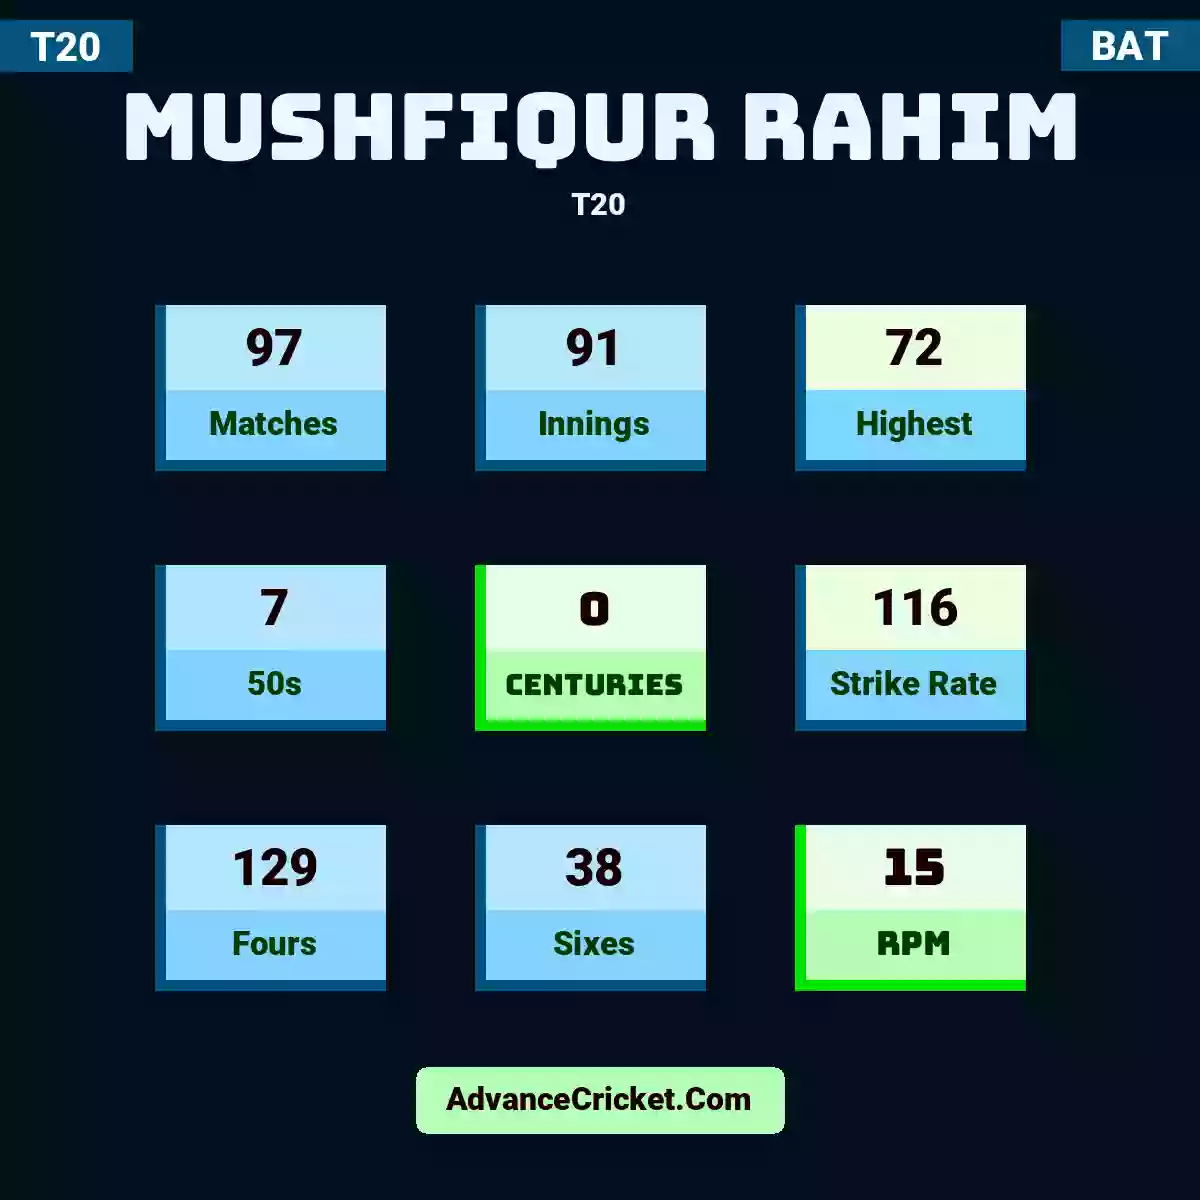 Mushfiqur Rahim T20 , Mushfiqur Rahim played 97 matches, scored 72 runs as highest, 7 half-centuries, and 0 centuries, with a strike rate of 116. M.Rahim hit 129 fours and 38 sixes, with an RPM of 15.